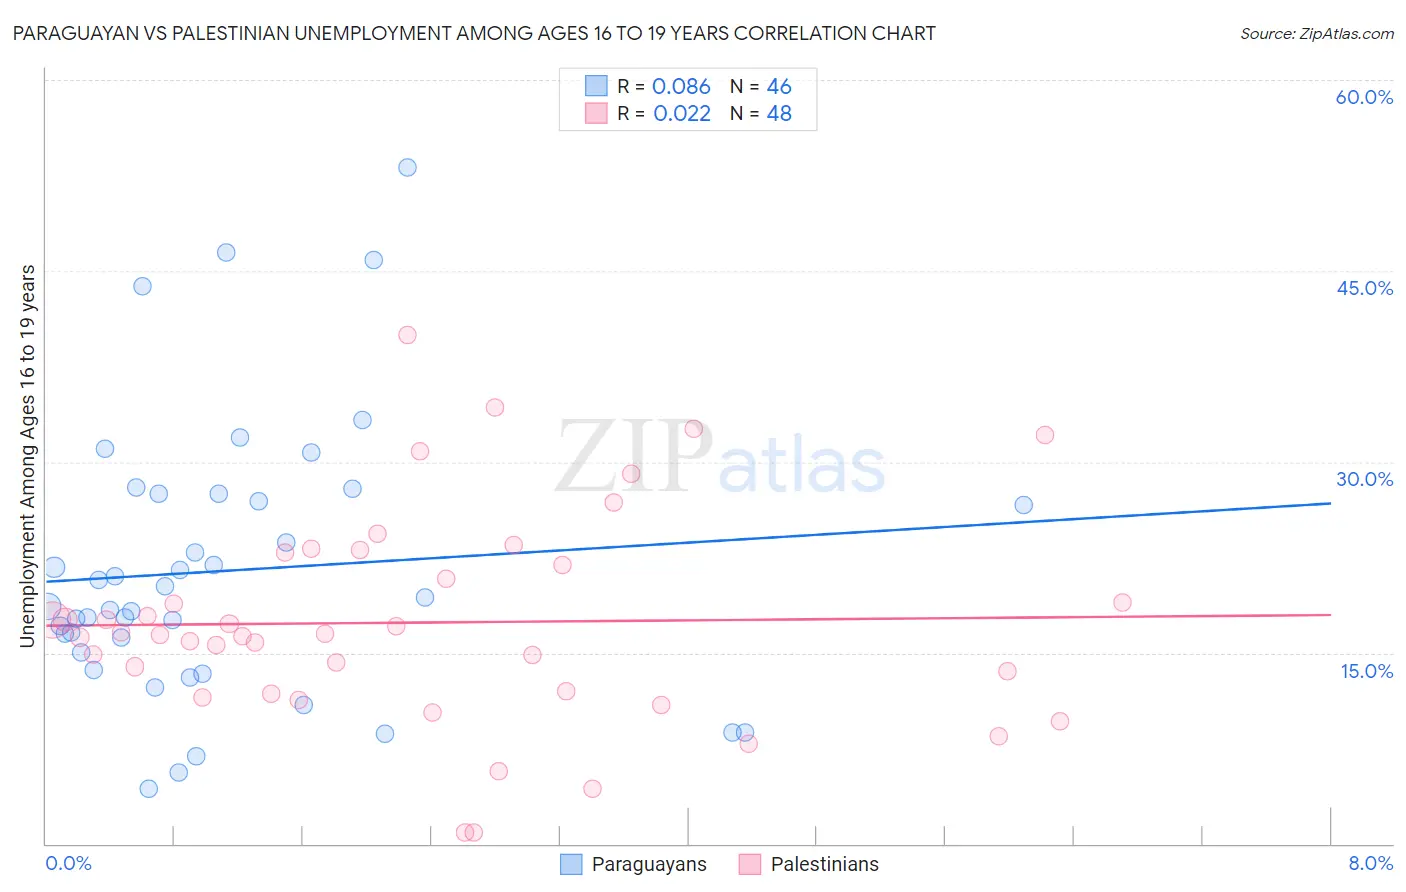 Paraguayan vs Palestinian Unemployment Among Ages 16 to 19 years